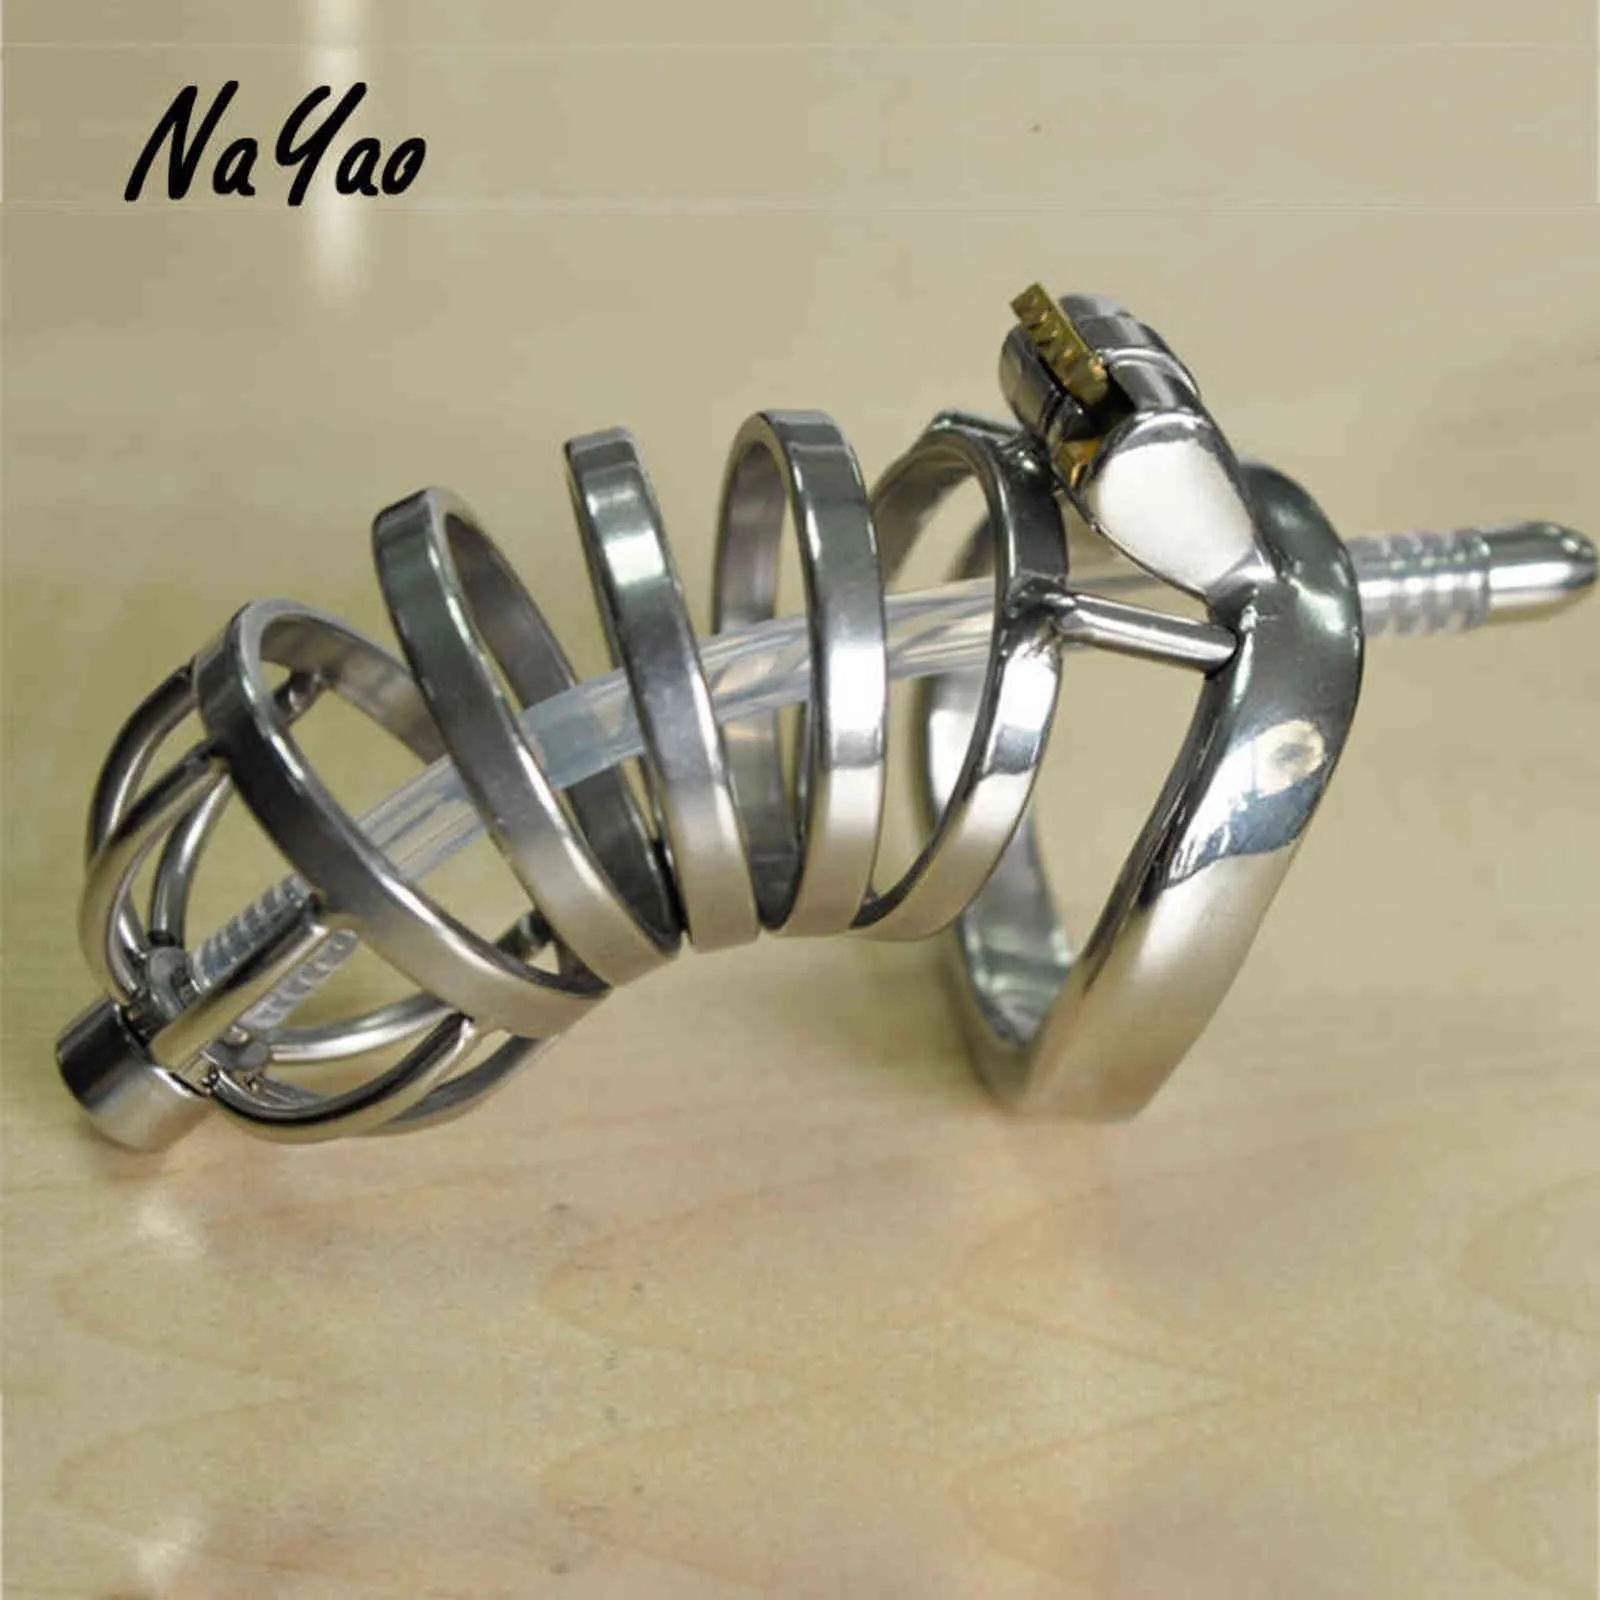 Cockrings Stainless Steel Special Lock Penis Cage Ring Plug Chastity Device Catheter Sex Toys for Men Adult A276 1123